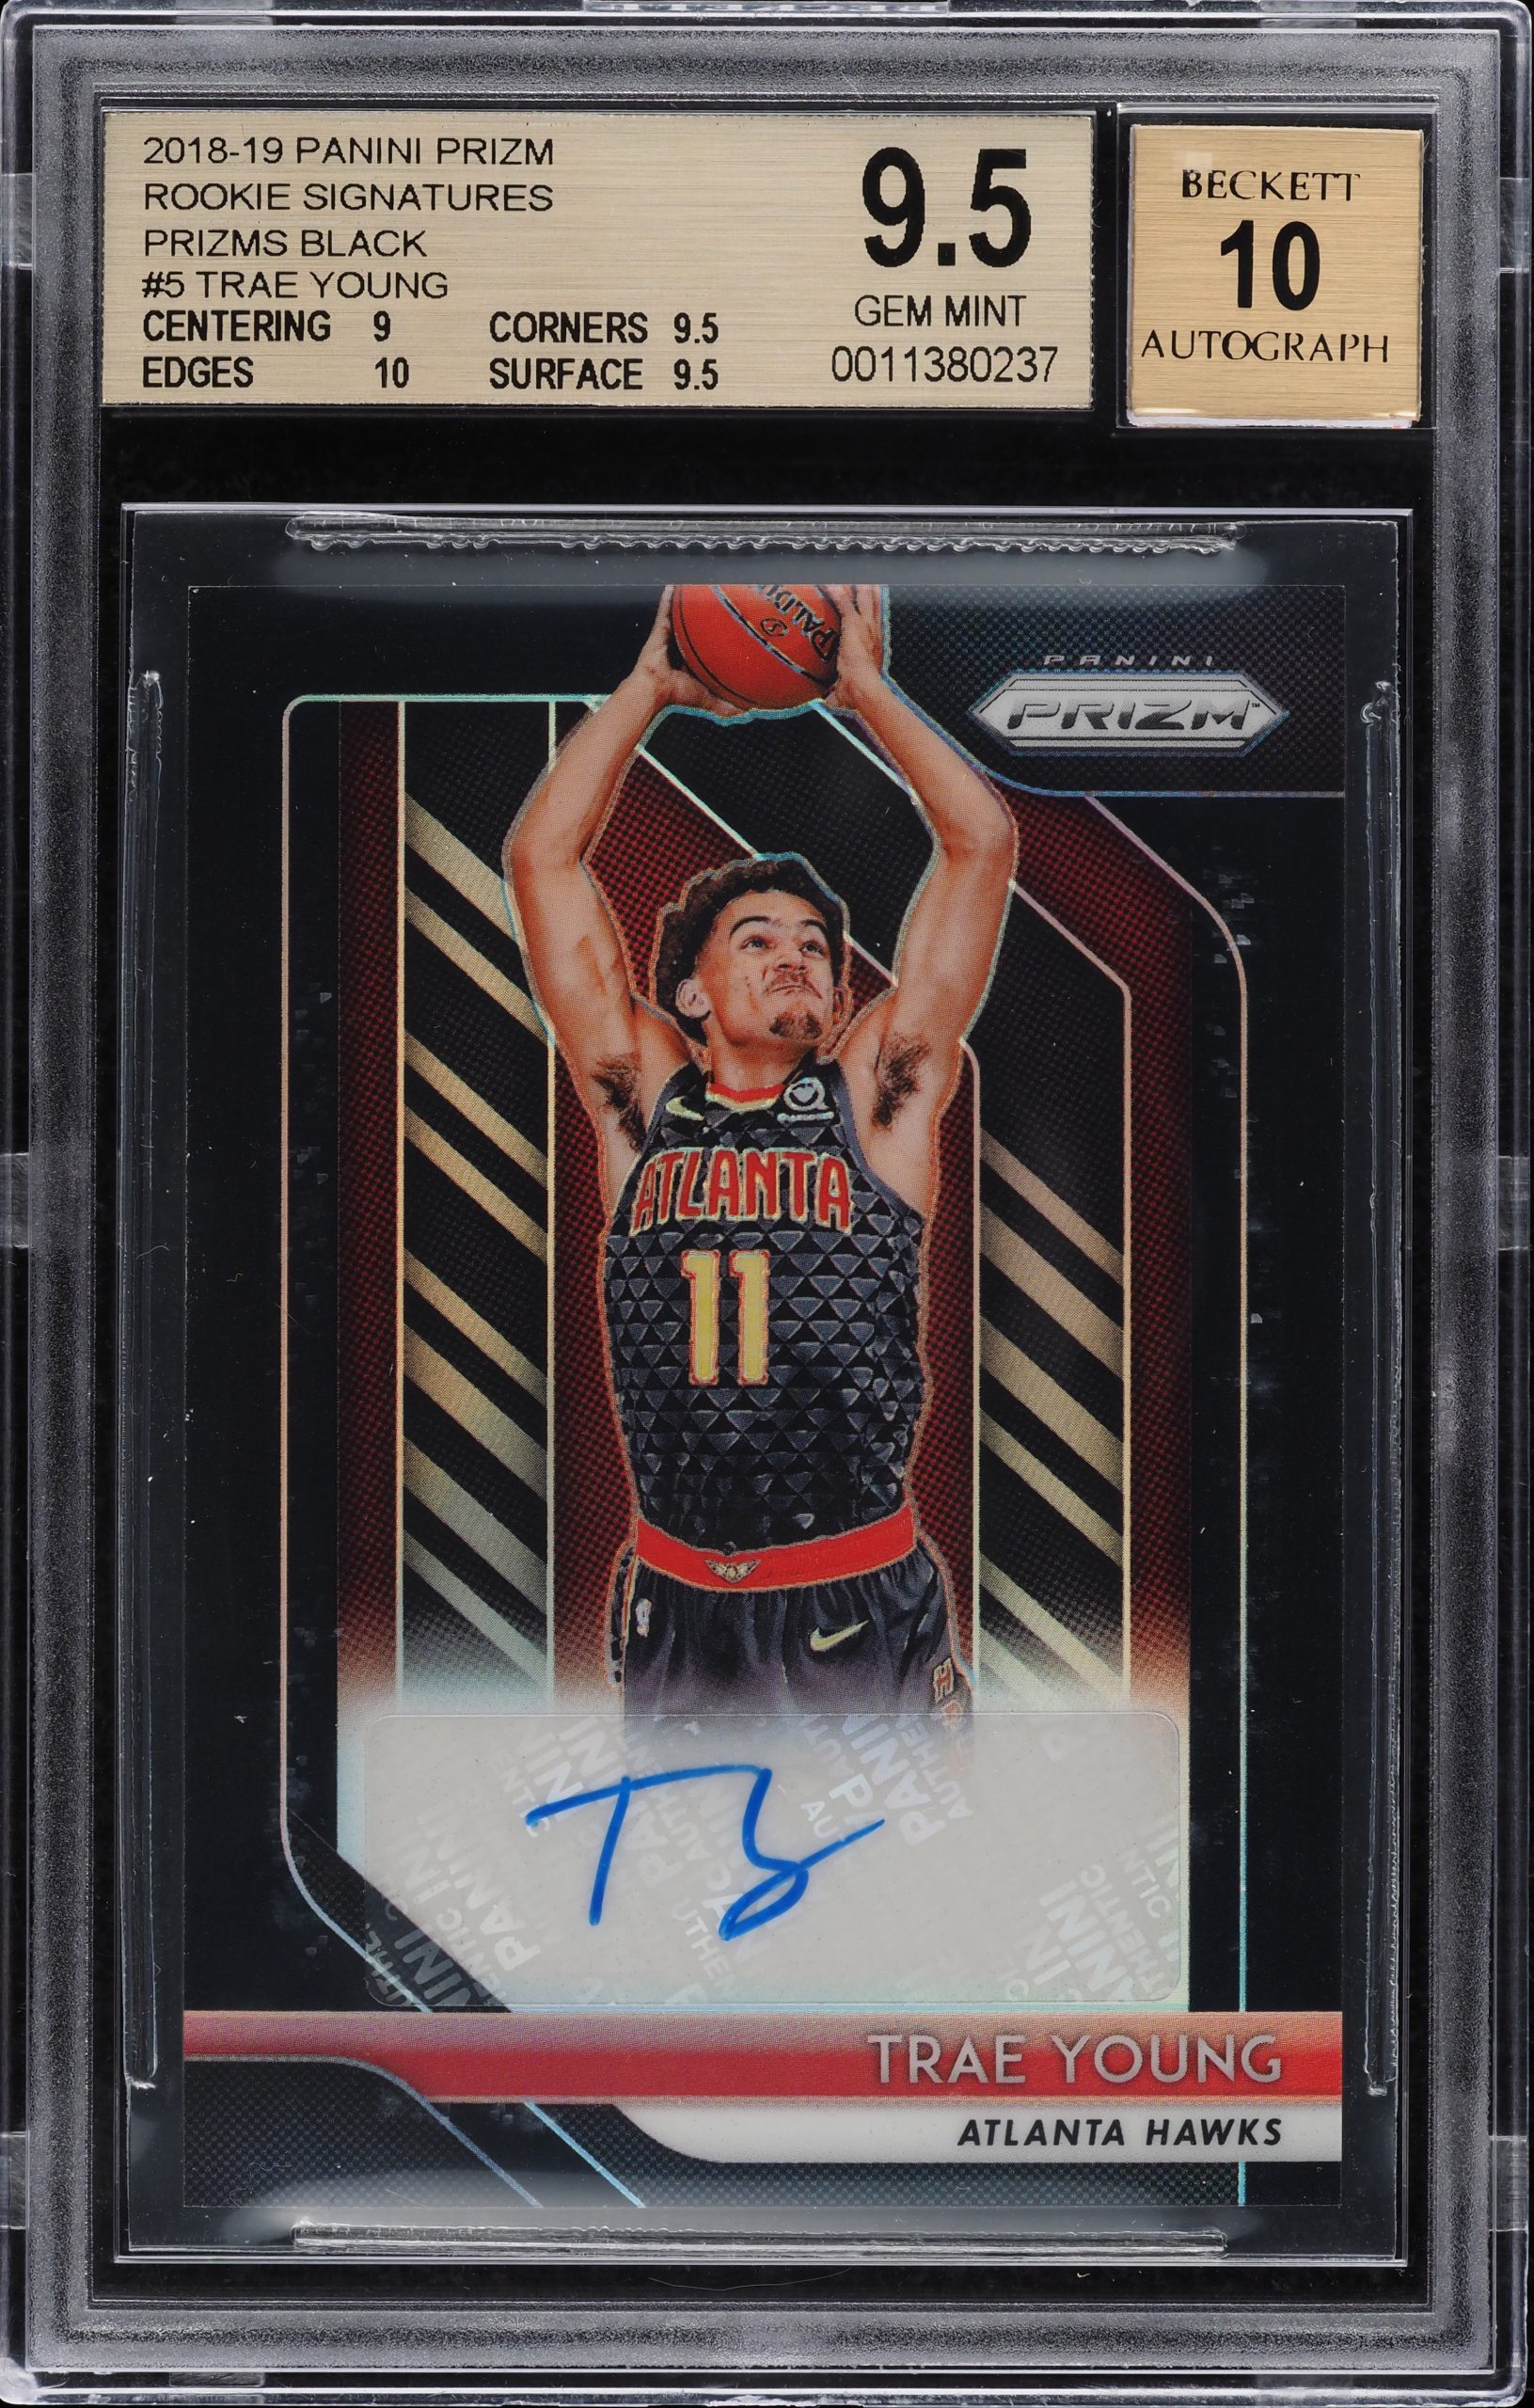 2018 Panini Prizm Signatures Black Prizm Trae Young ROOKIE AUTO 1/1 #5 BGS 9.5 - Front